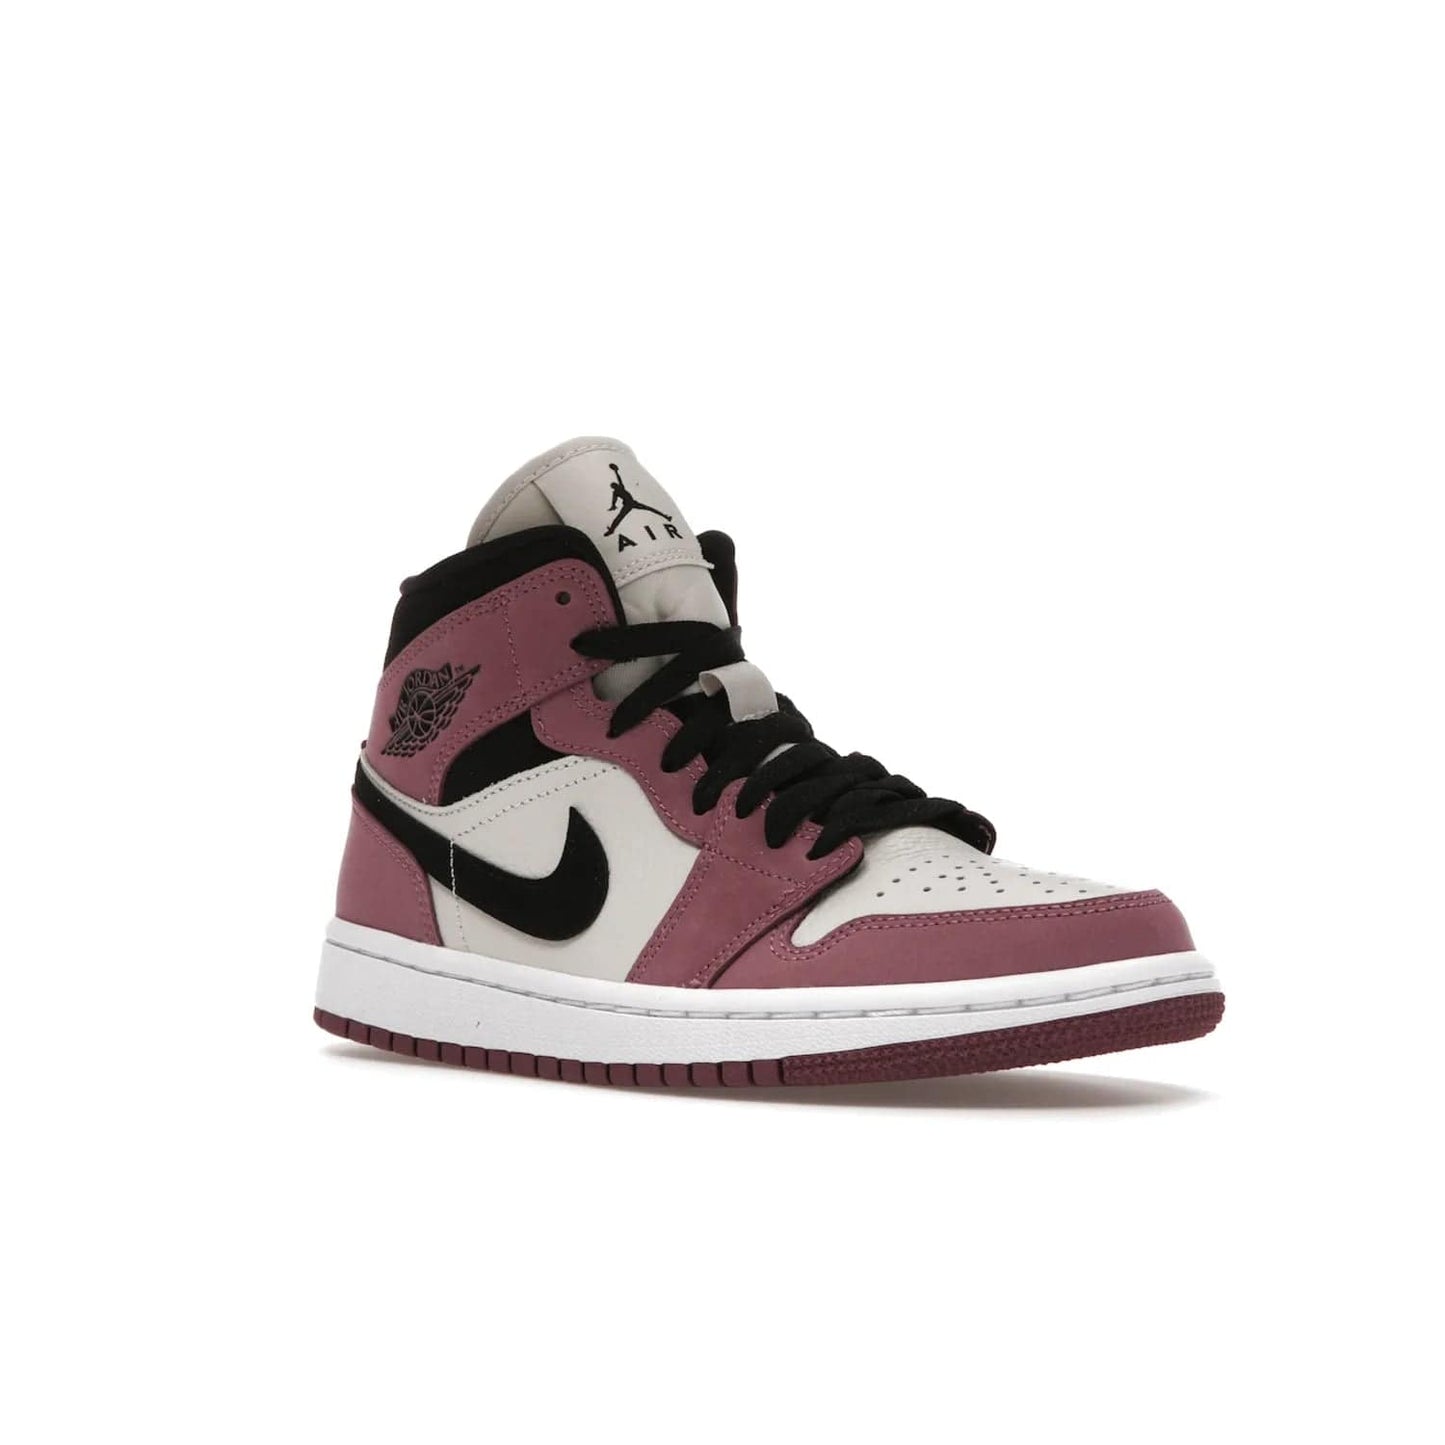 Jordan 1 Mid SE Light Mulberry (Women's) - Image 5 - Only at www.BallersClubKickz.com - Classic style meets performance with the Air Jordan 1 Mid Light Mulberry (Women's). Sleek leather overlays and light bone detailing bring out the best of this classic sneaker, perfect for the active woman on-the-go. Available March 2022.